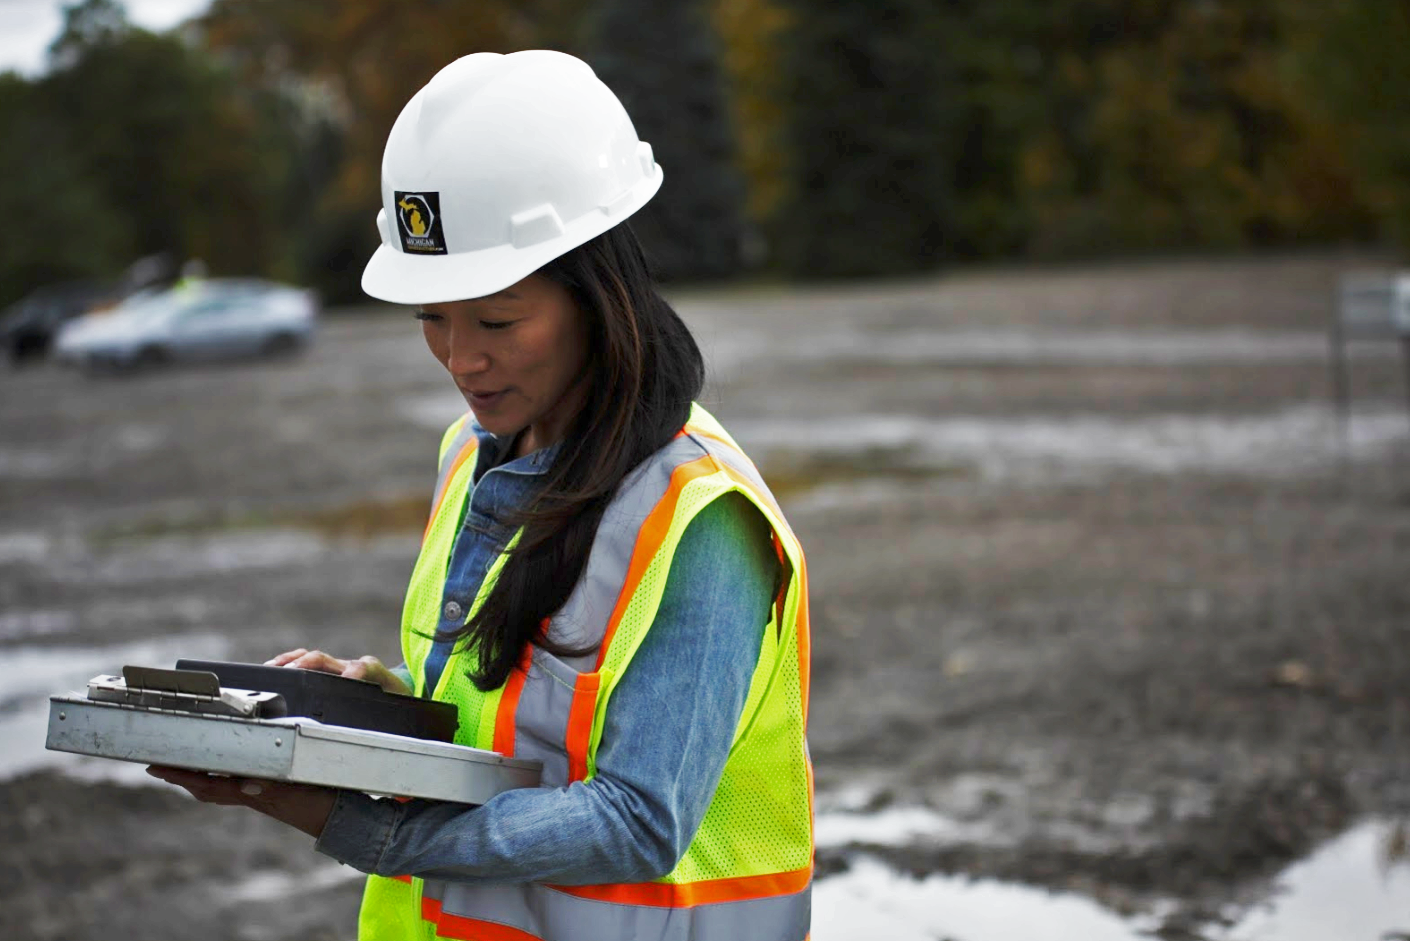 Women in Construction Finding Success in a Predominately Male Industry